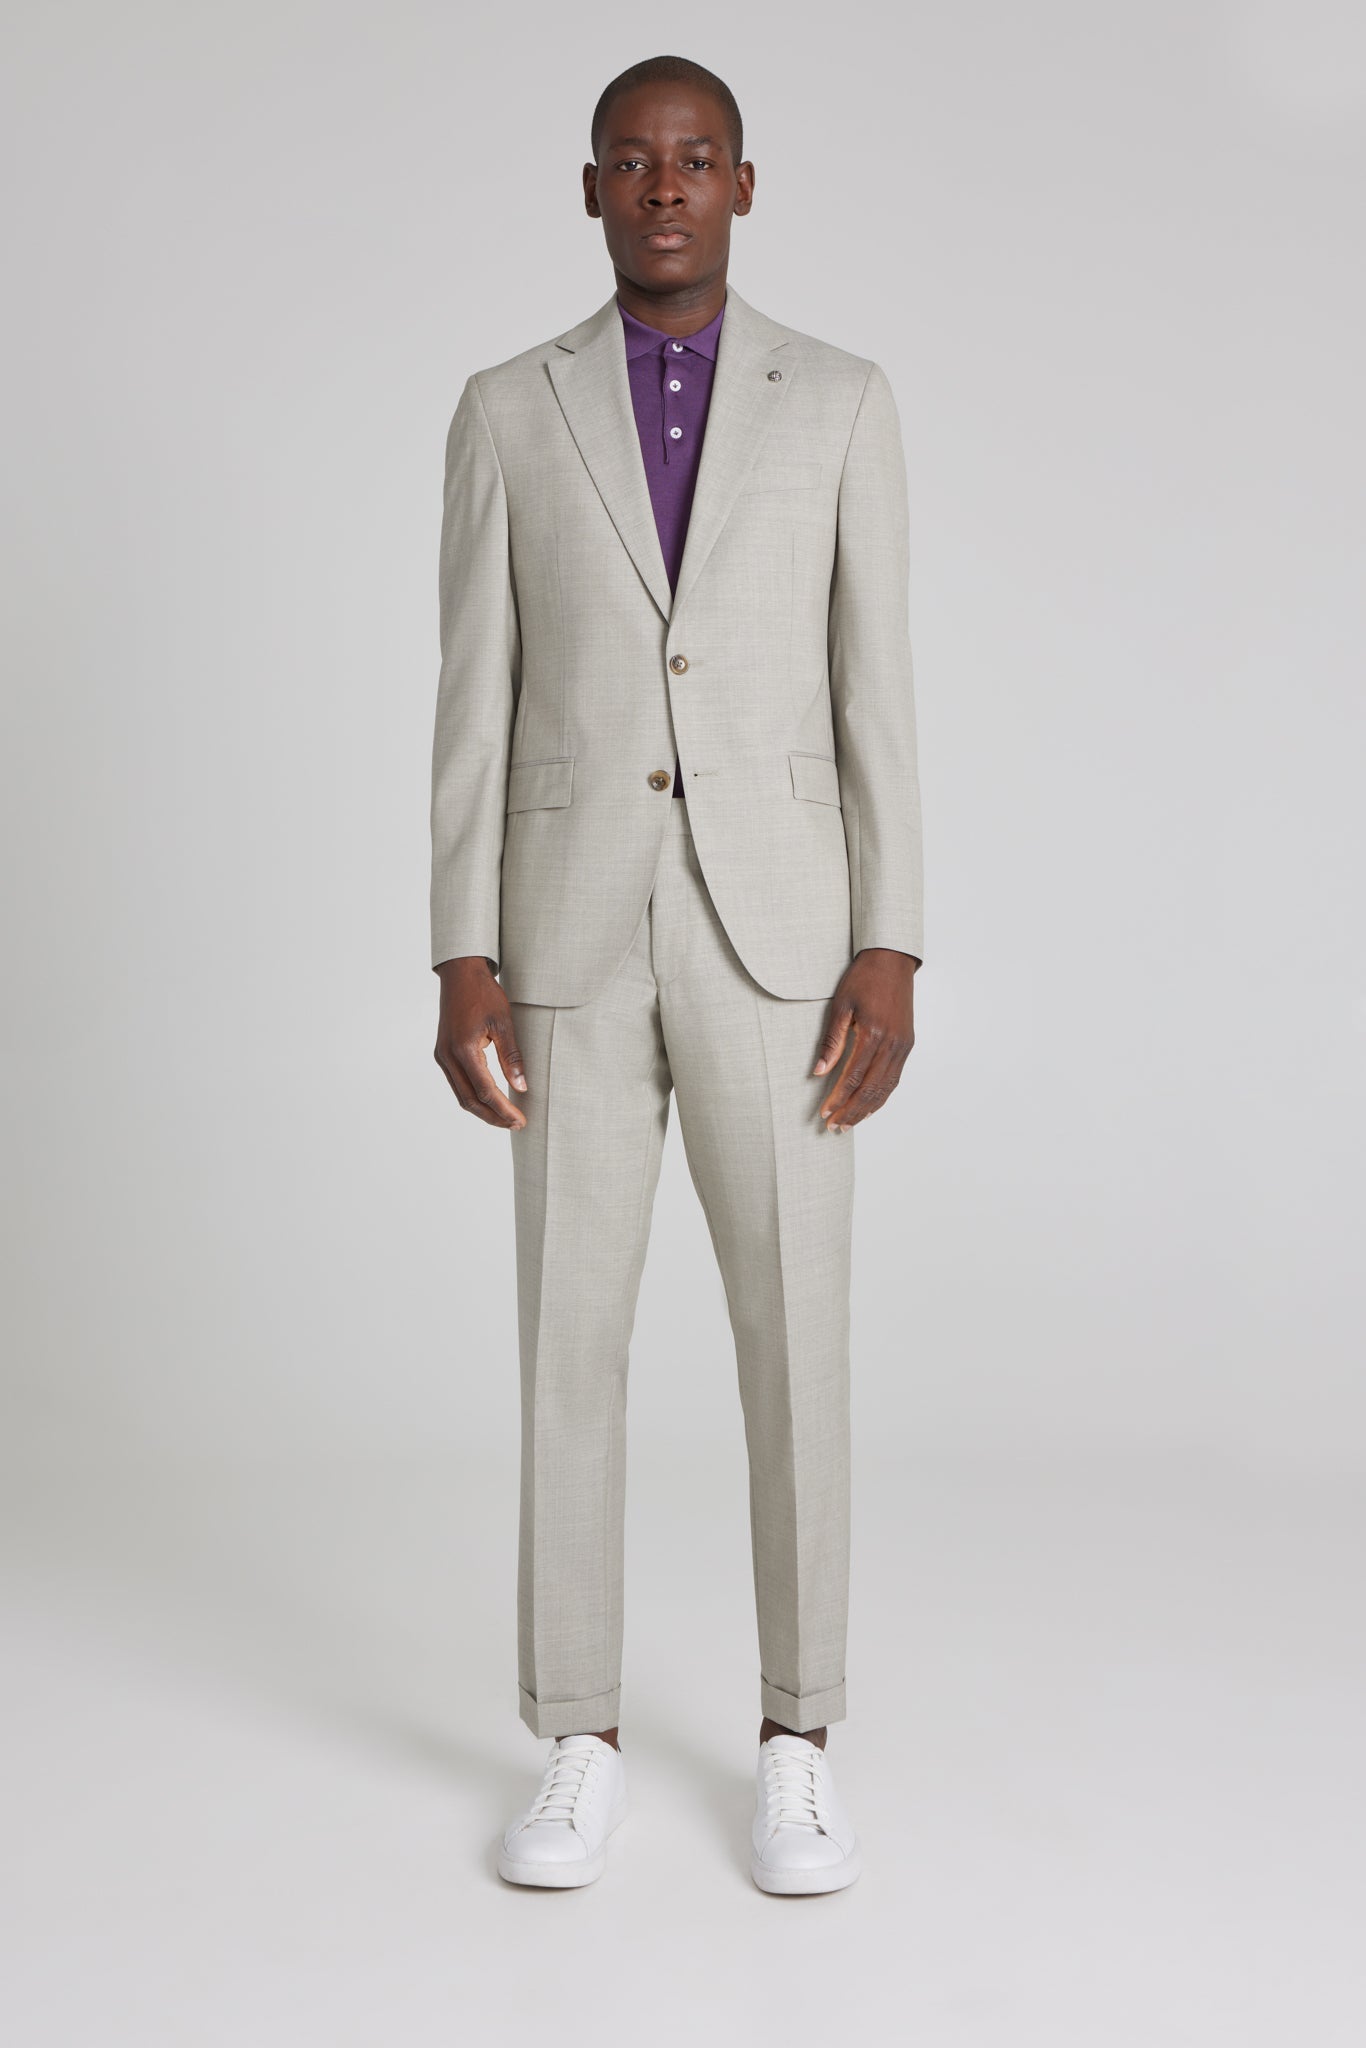 Alt view 1 Midland Solid Wool Suit in Taupe